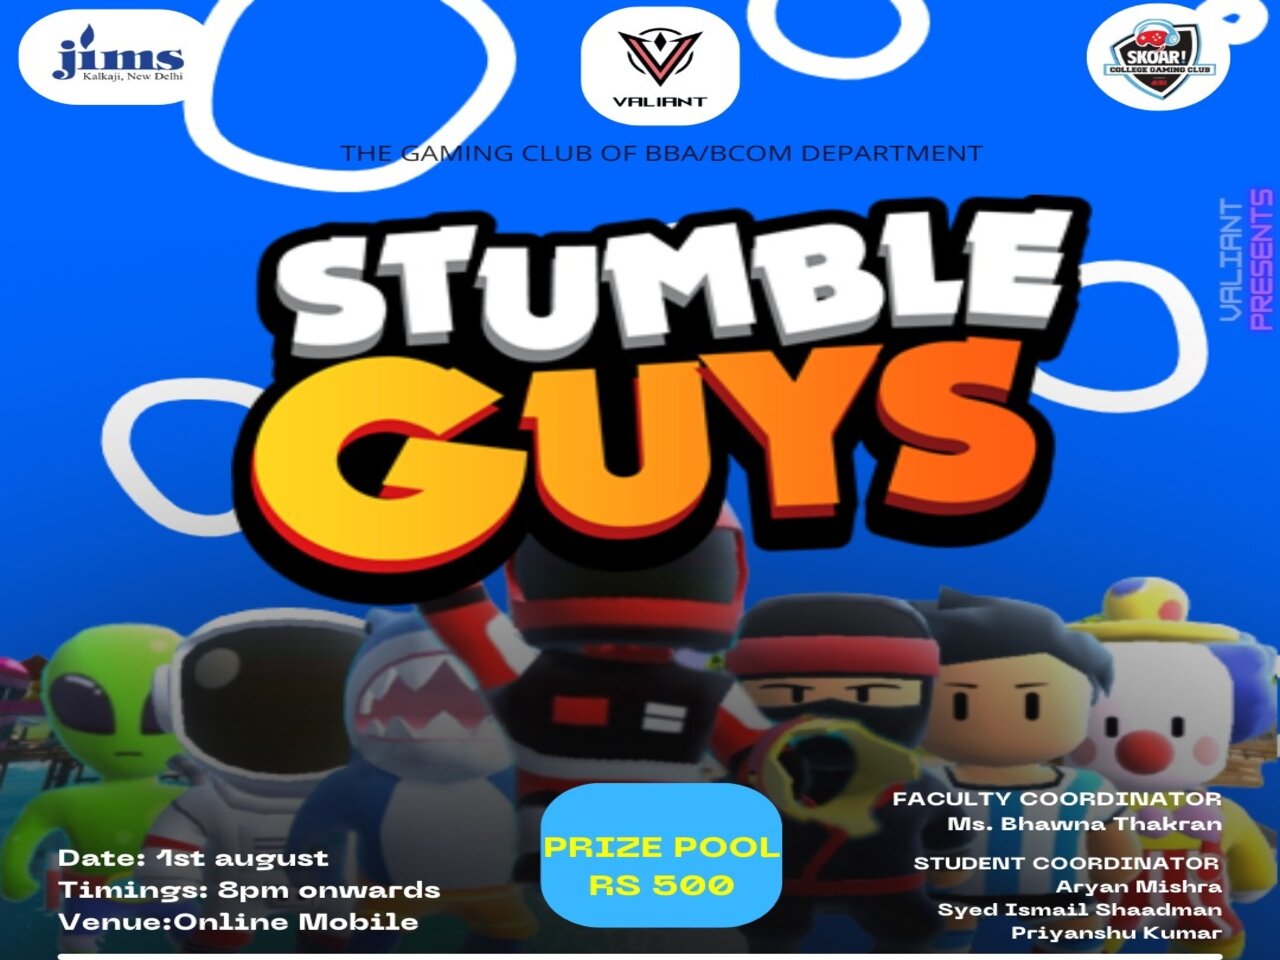 Stumble Guys adds themed in-game goodies and a new level in NFL  collaboration event